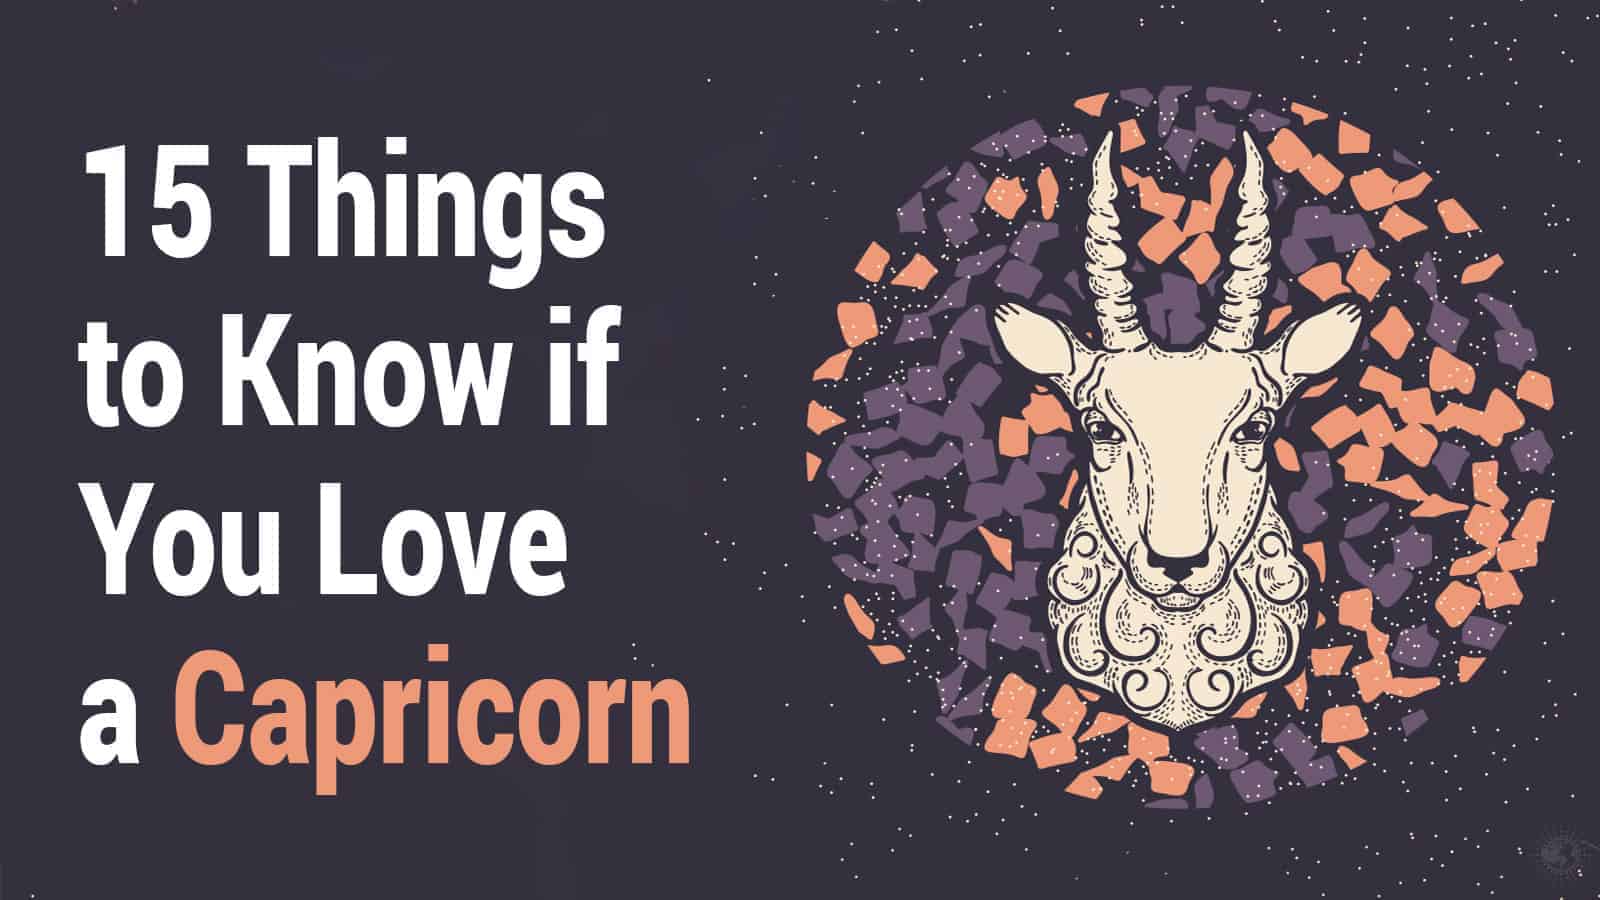 15 Things to Know if You Love a Capricorn